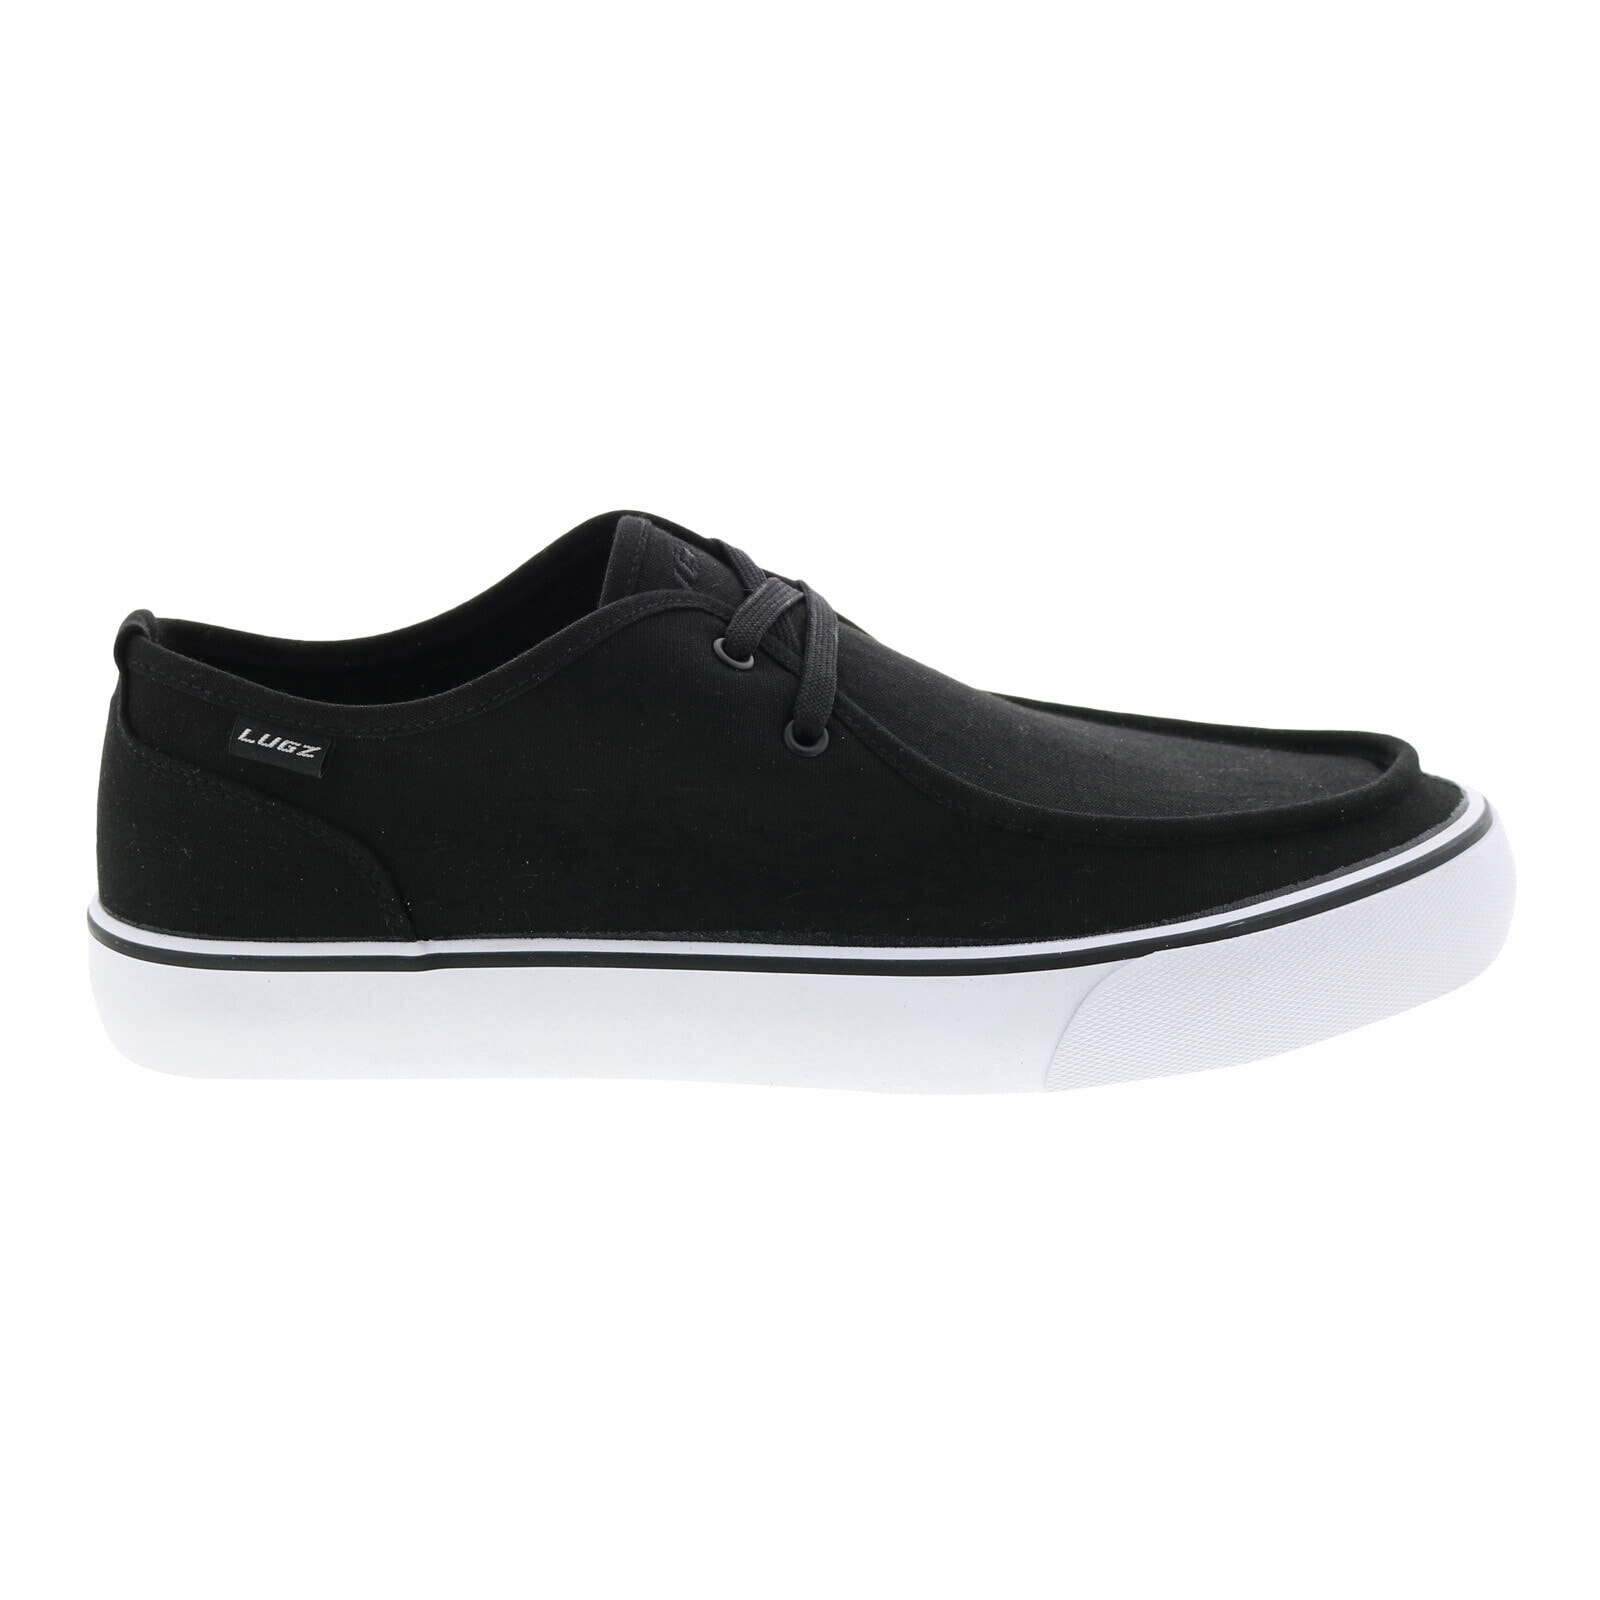 Lugz Sterling MSTERLC-060 Mens Black Canvas Lifestyle Sneakers Shoes